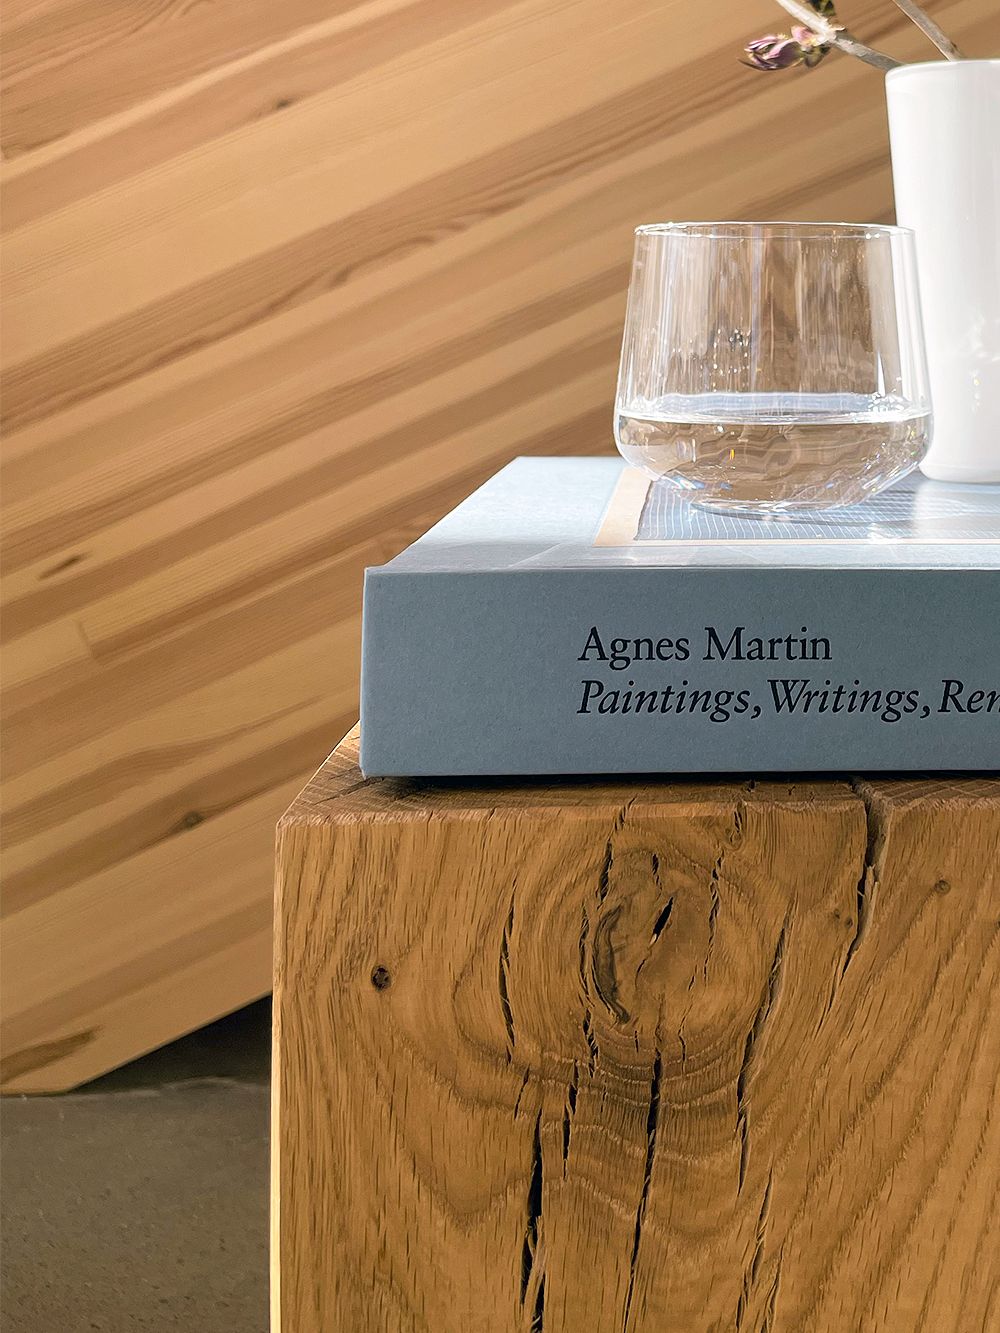 Nikari Biennale stool used as a side table, with a book and a glass of water on top